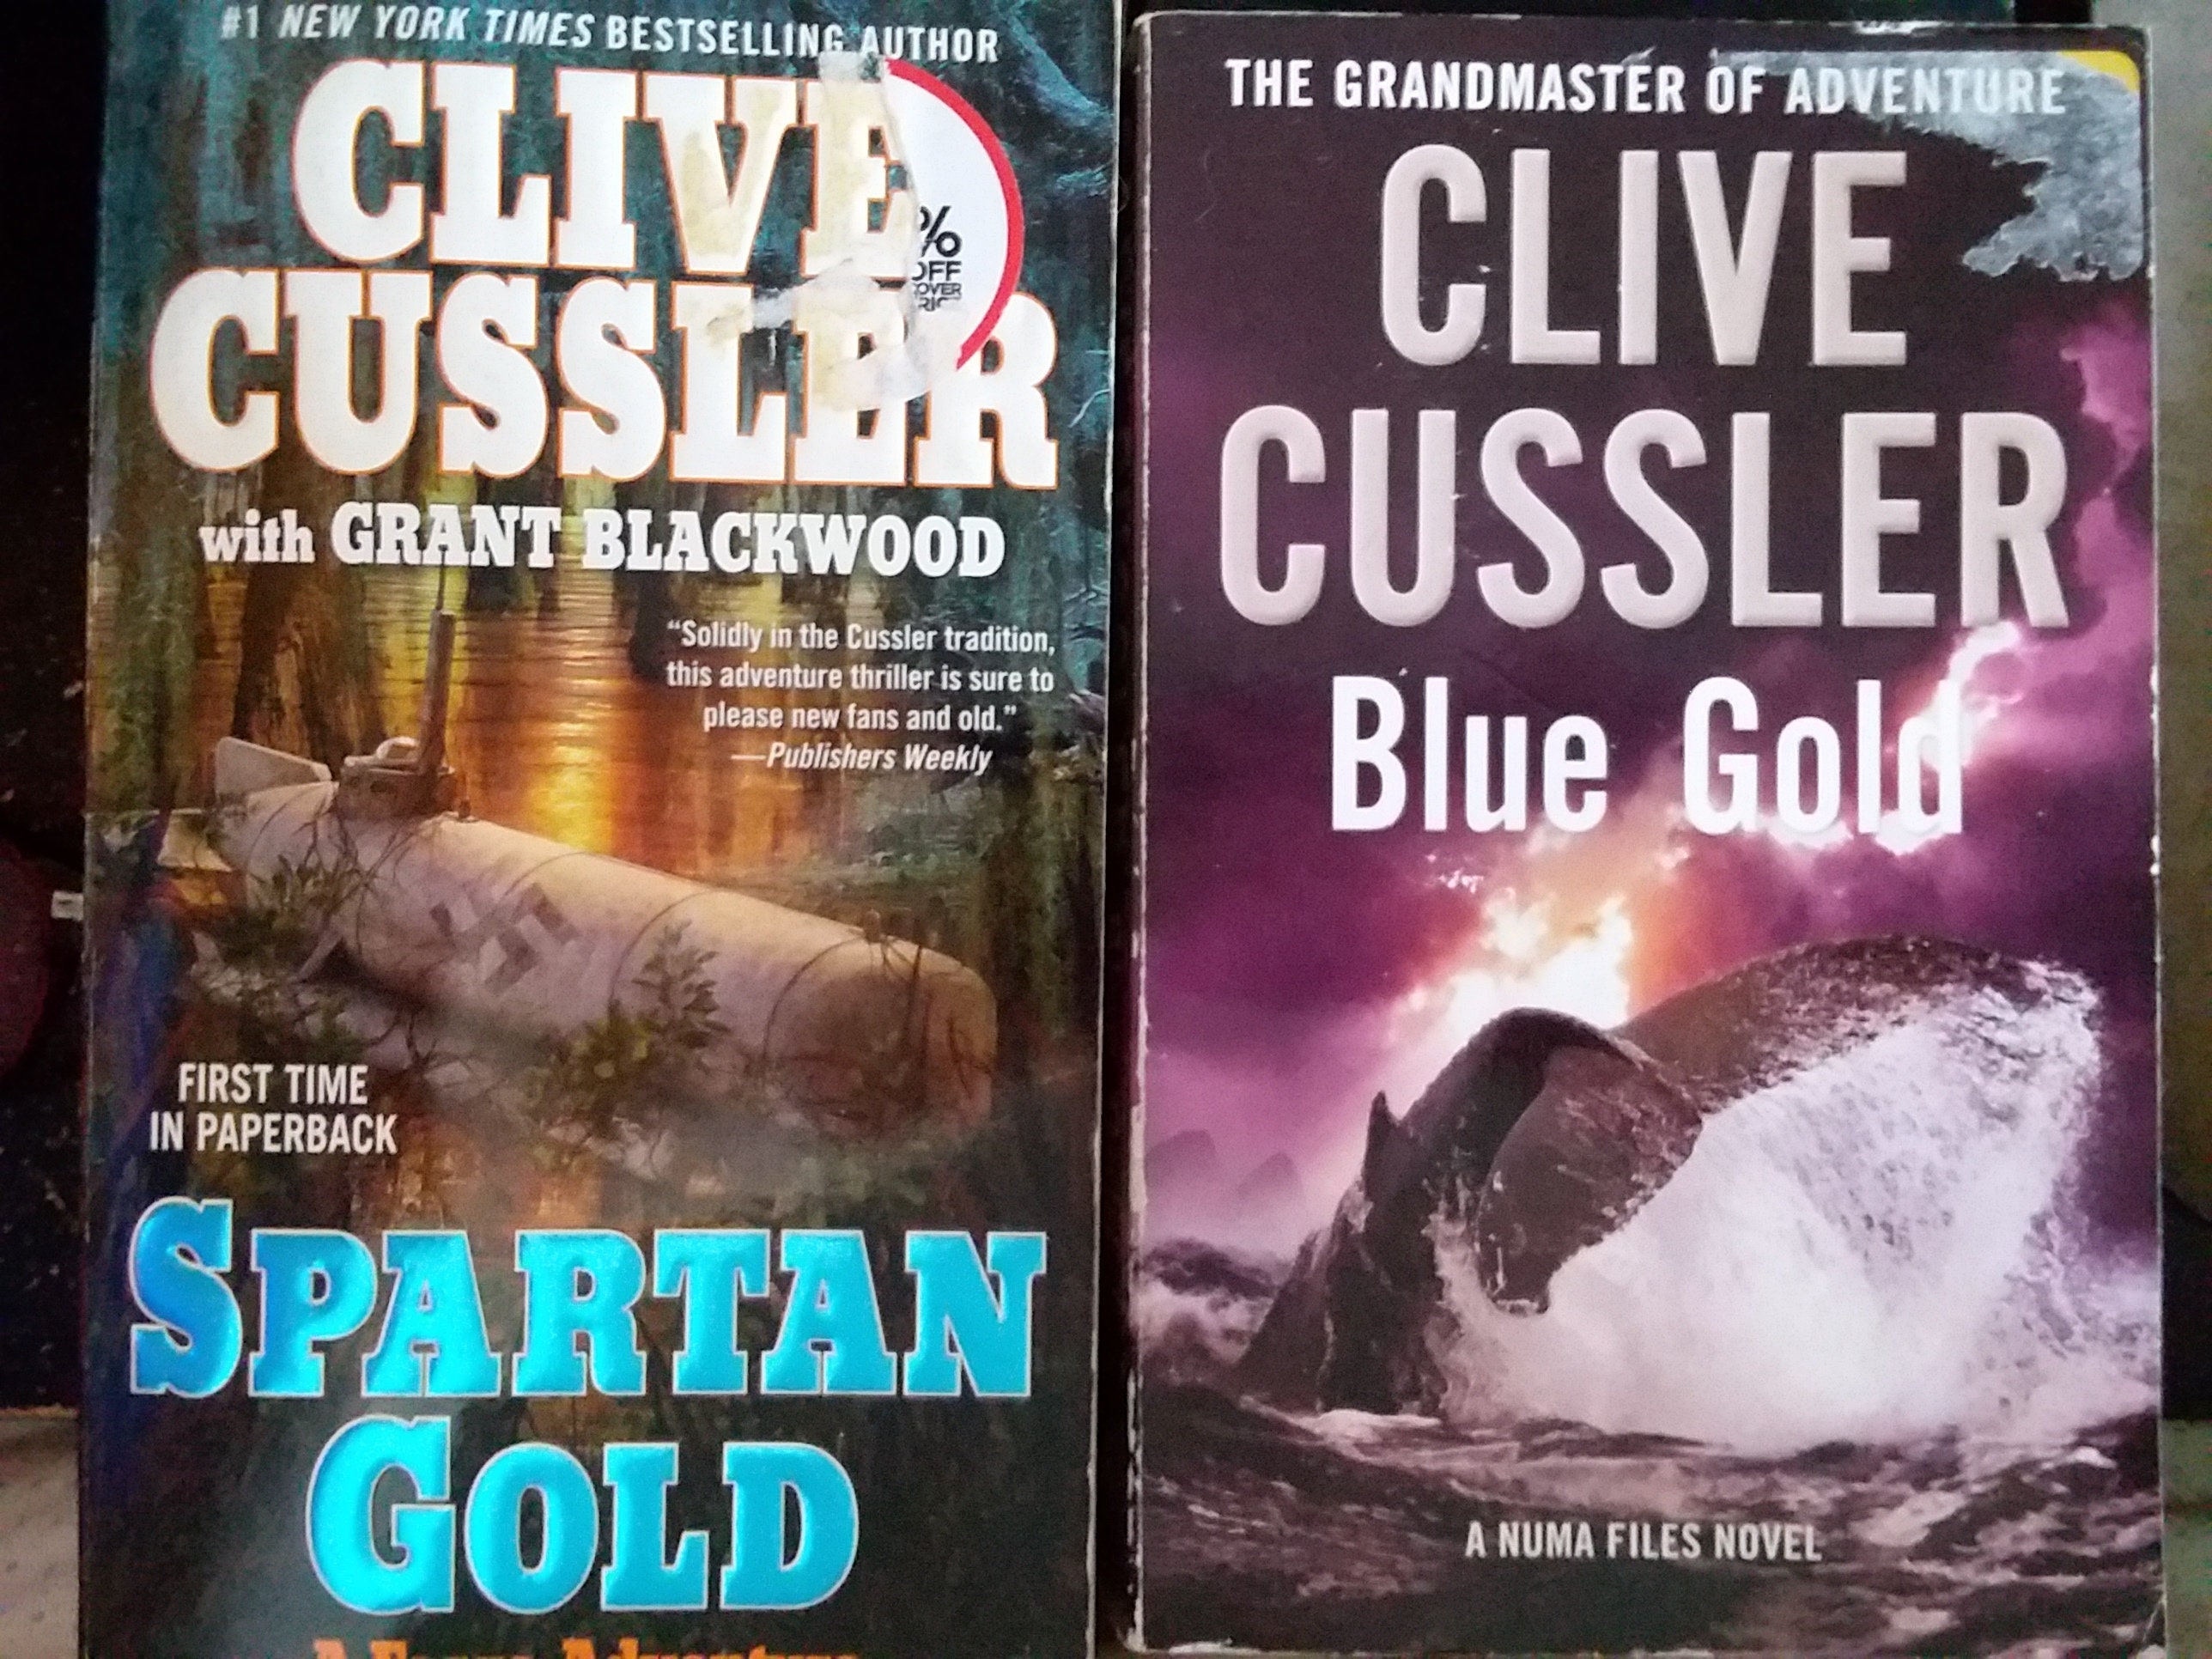 Lot of 10 Clive Cussler Books 8 Softcover 2 Hardcover Etsy UK